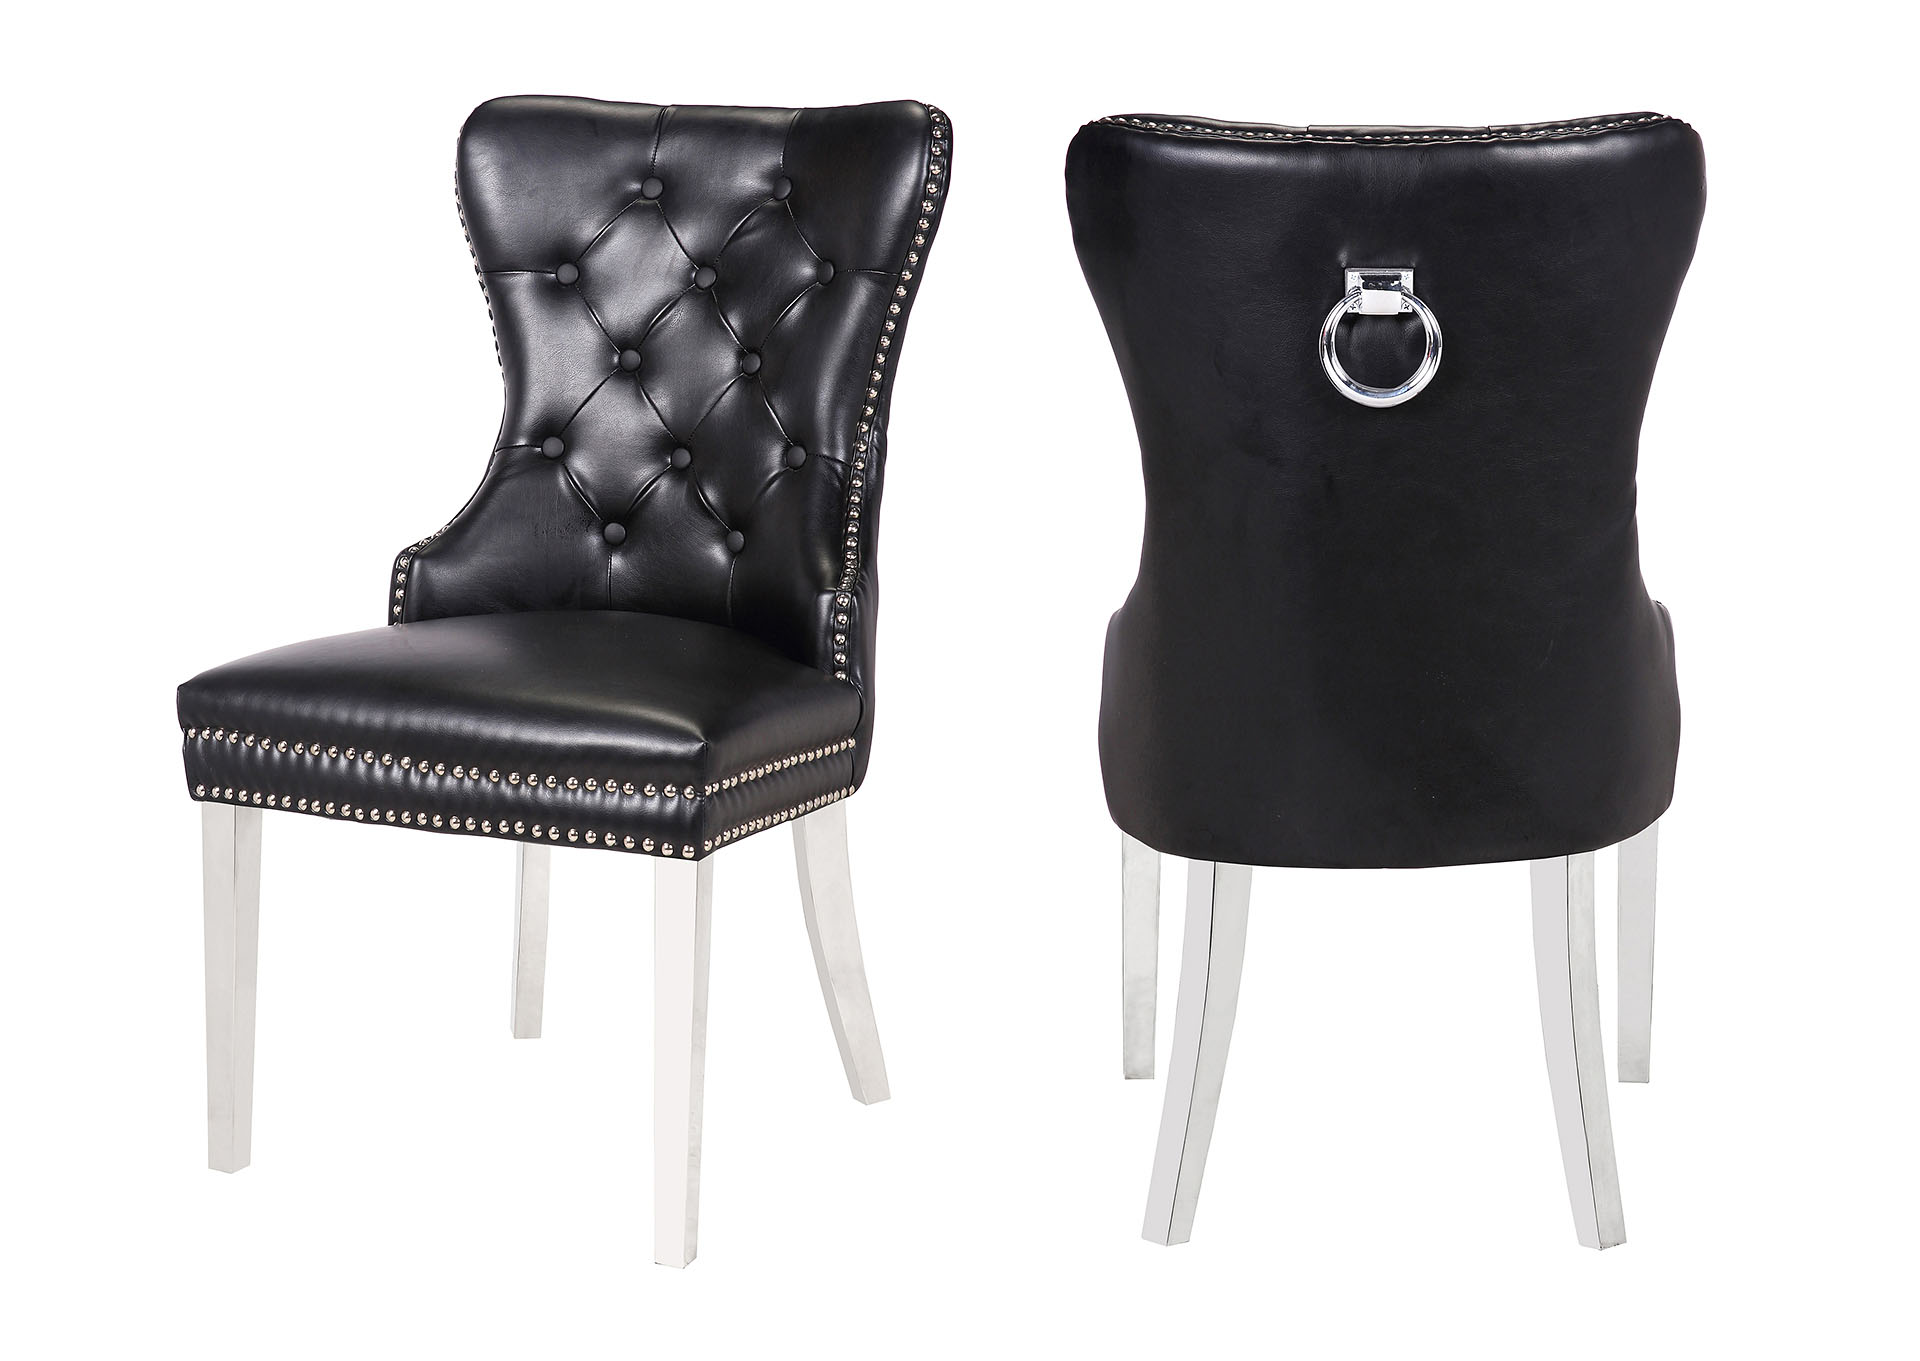 Erica Black Accent chairs / dining chairs,Galaxy Home Furniture